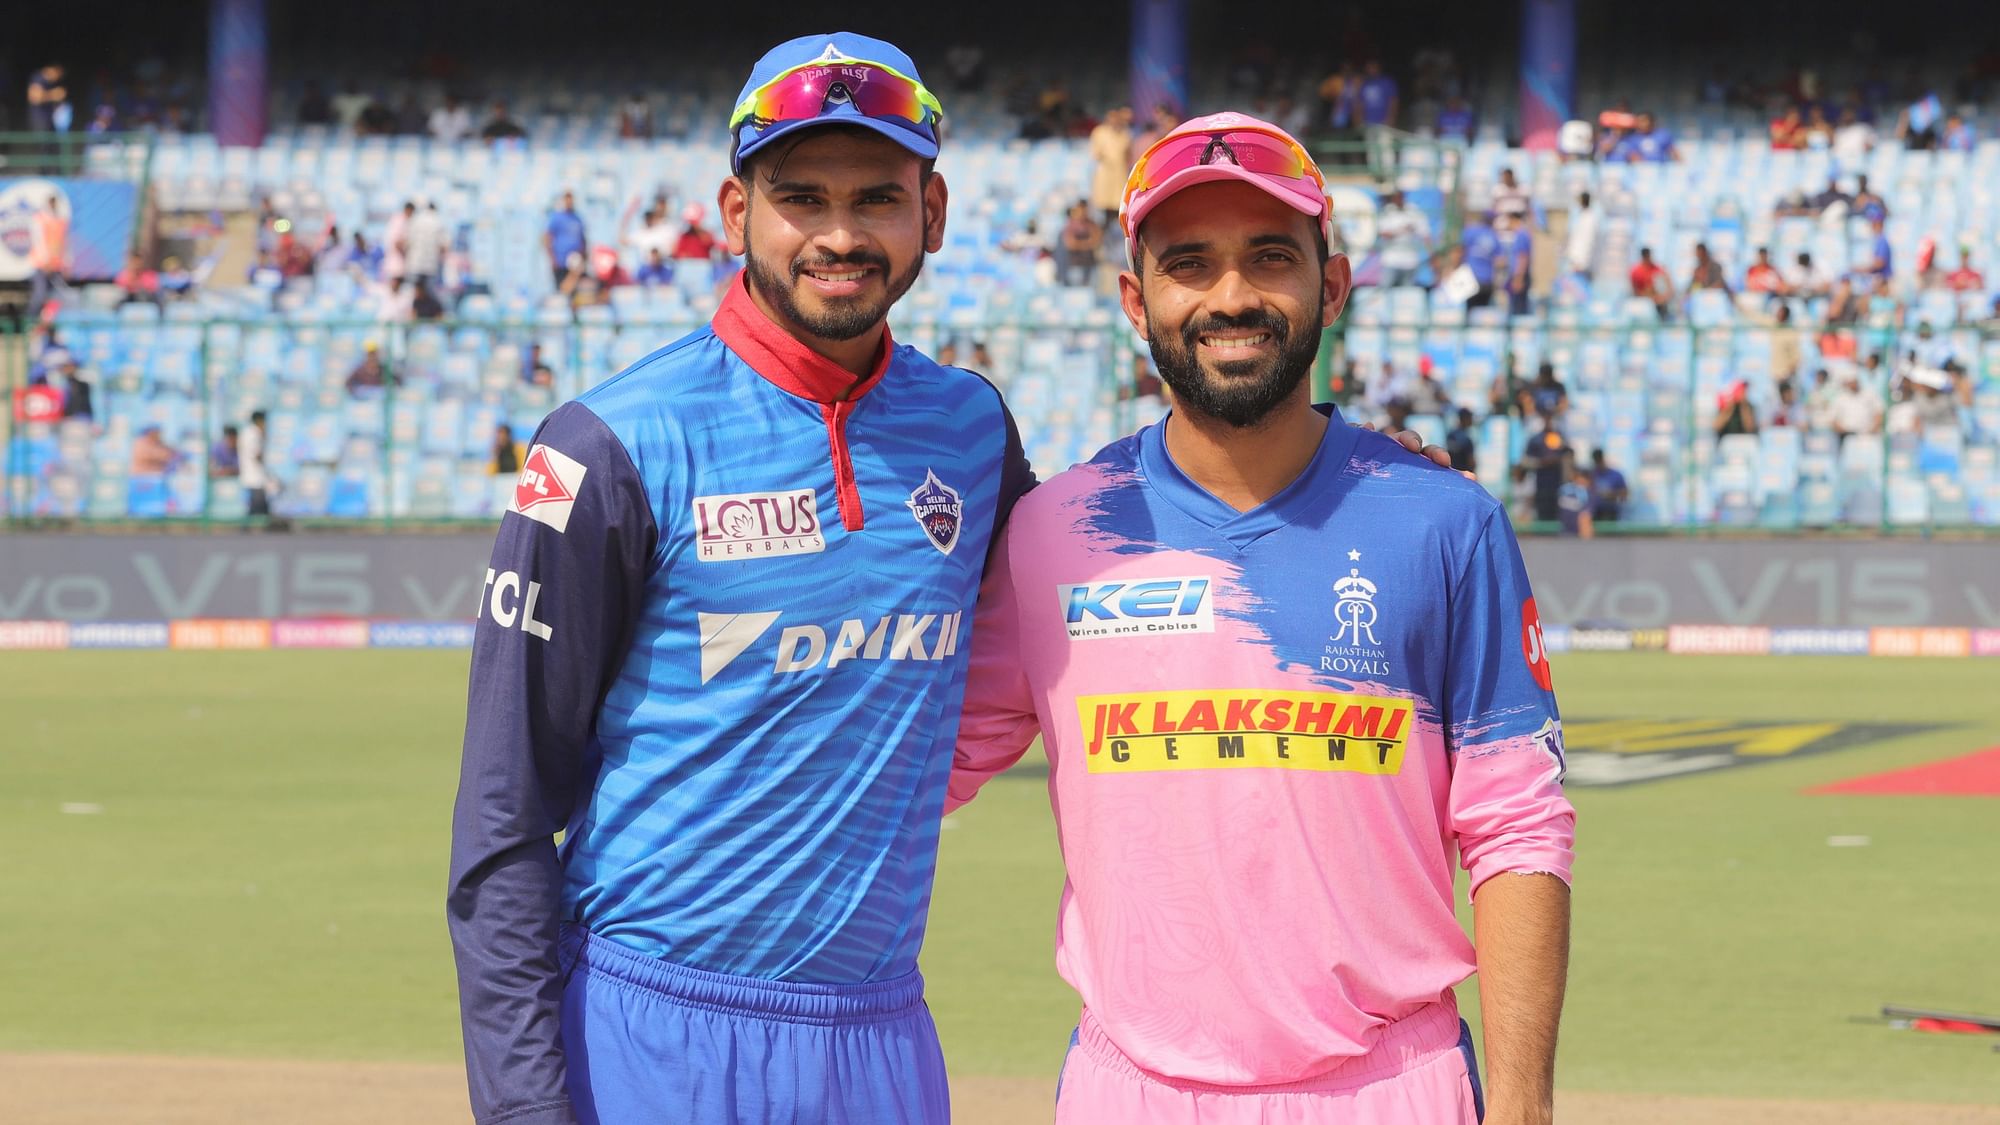 Rajasthan Royals won the toss and opted to bat in their IPL match against Delhi Capitals on Saturday.